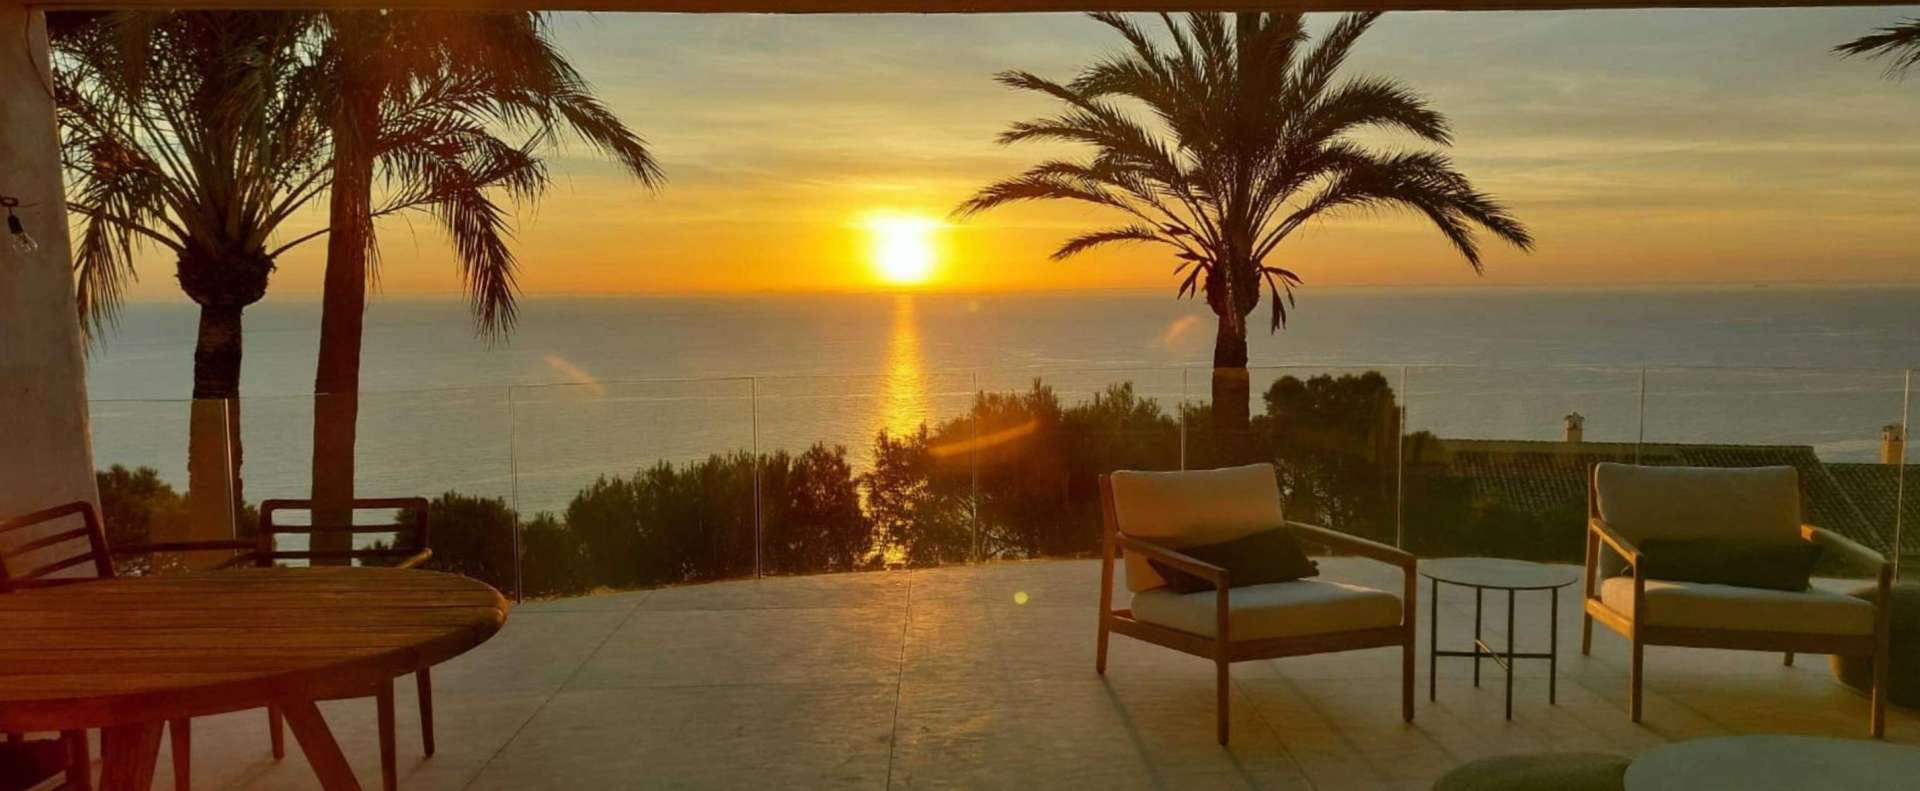 FIRST LINE SEA Javea IMPRESSIVE PROPERTY facing the Sea by COSTA HOUSES Luxury Villas S.L ®  Frontal Sea Views, Luxury LifeStyle, Decorated by Missoni Italia